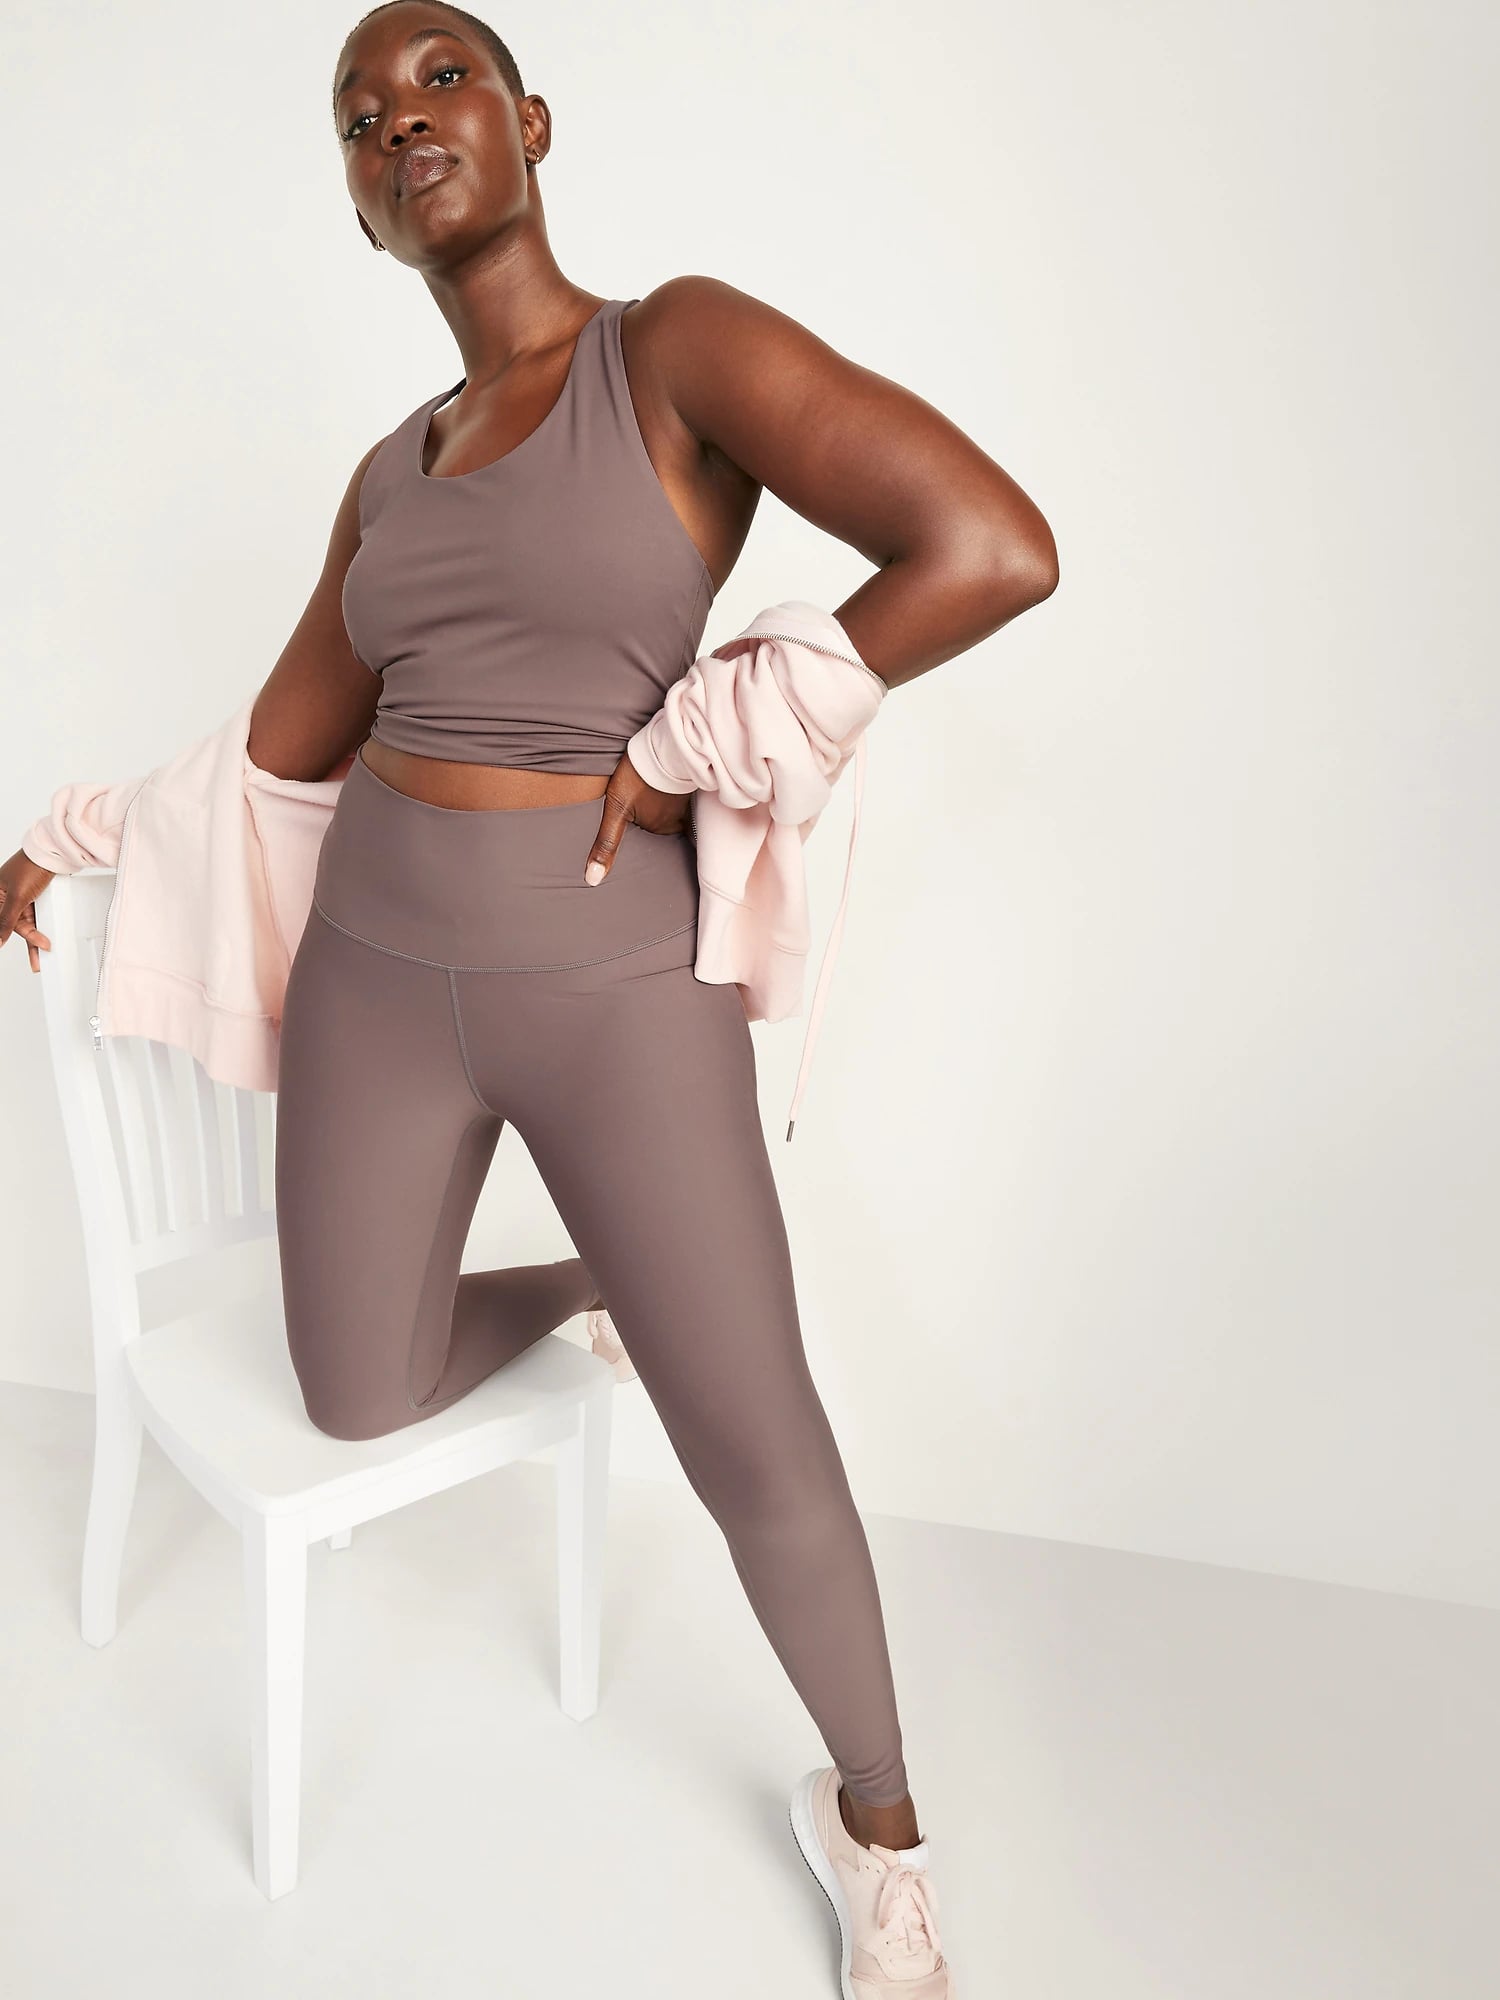 Today Only! $10 Thermal Leggings at Old Navy (Reg. $25) - The Freebie Guy:  Freebies, Penny Shopping, Deals, & Giveaways